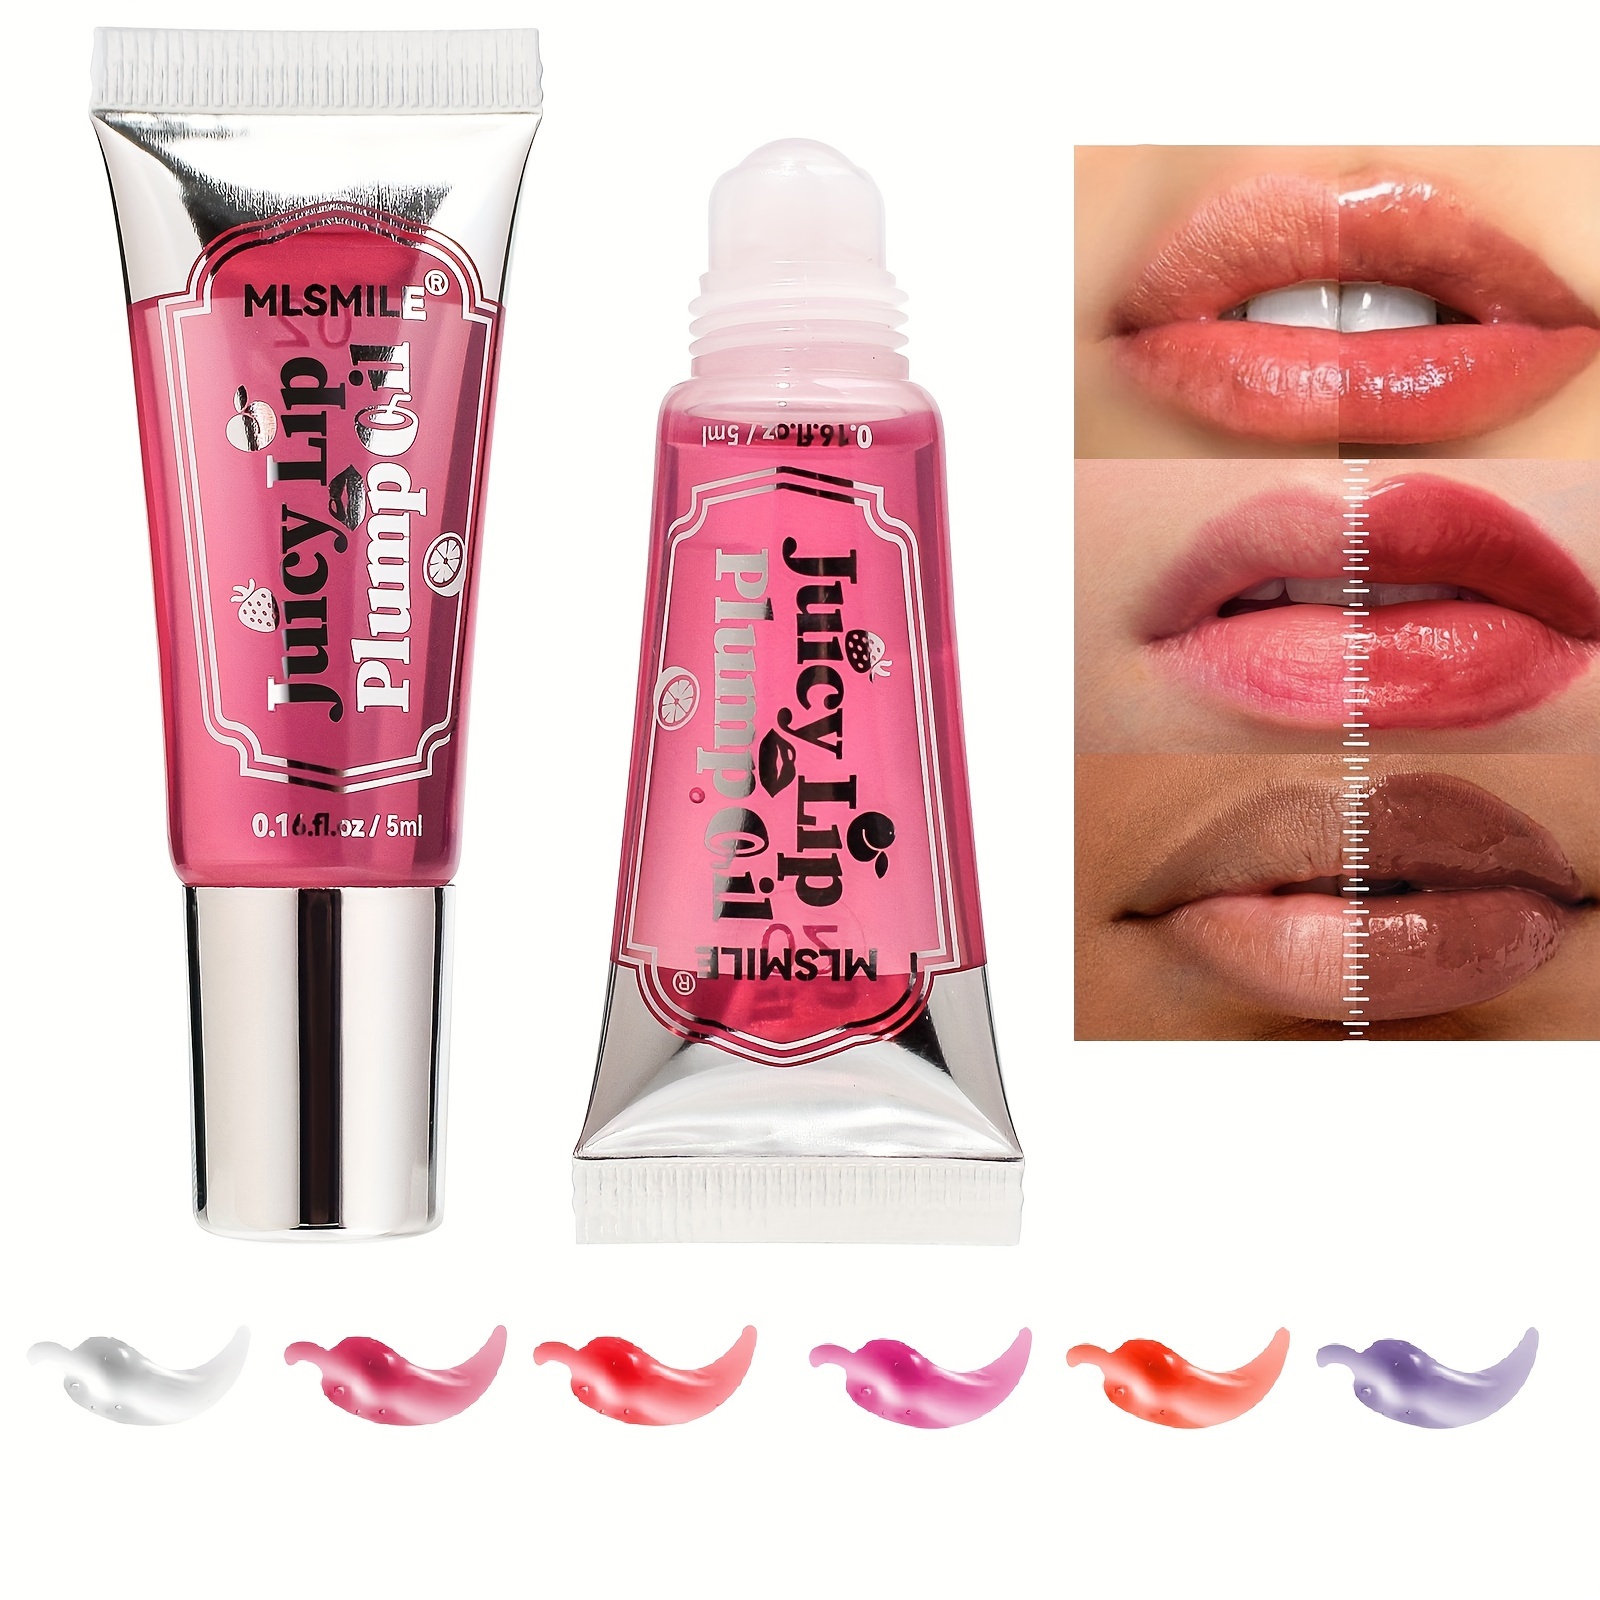 New Flavoring Oils For Lip Gloss ! 